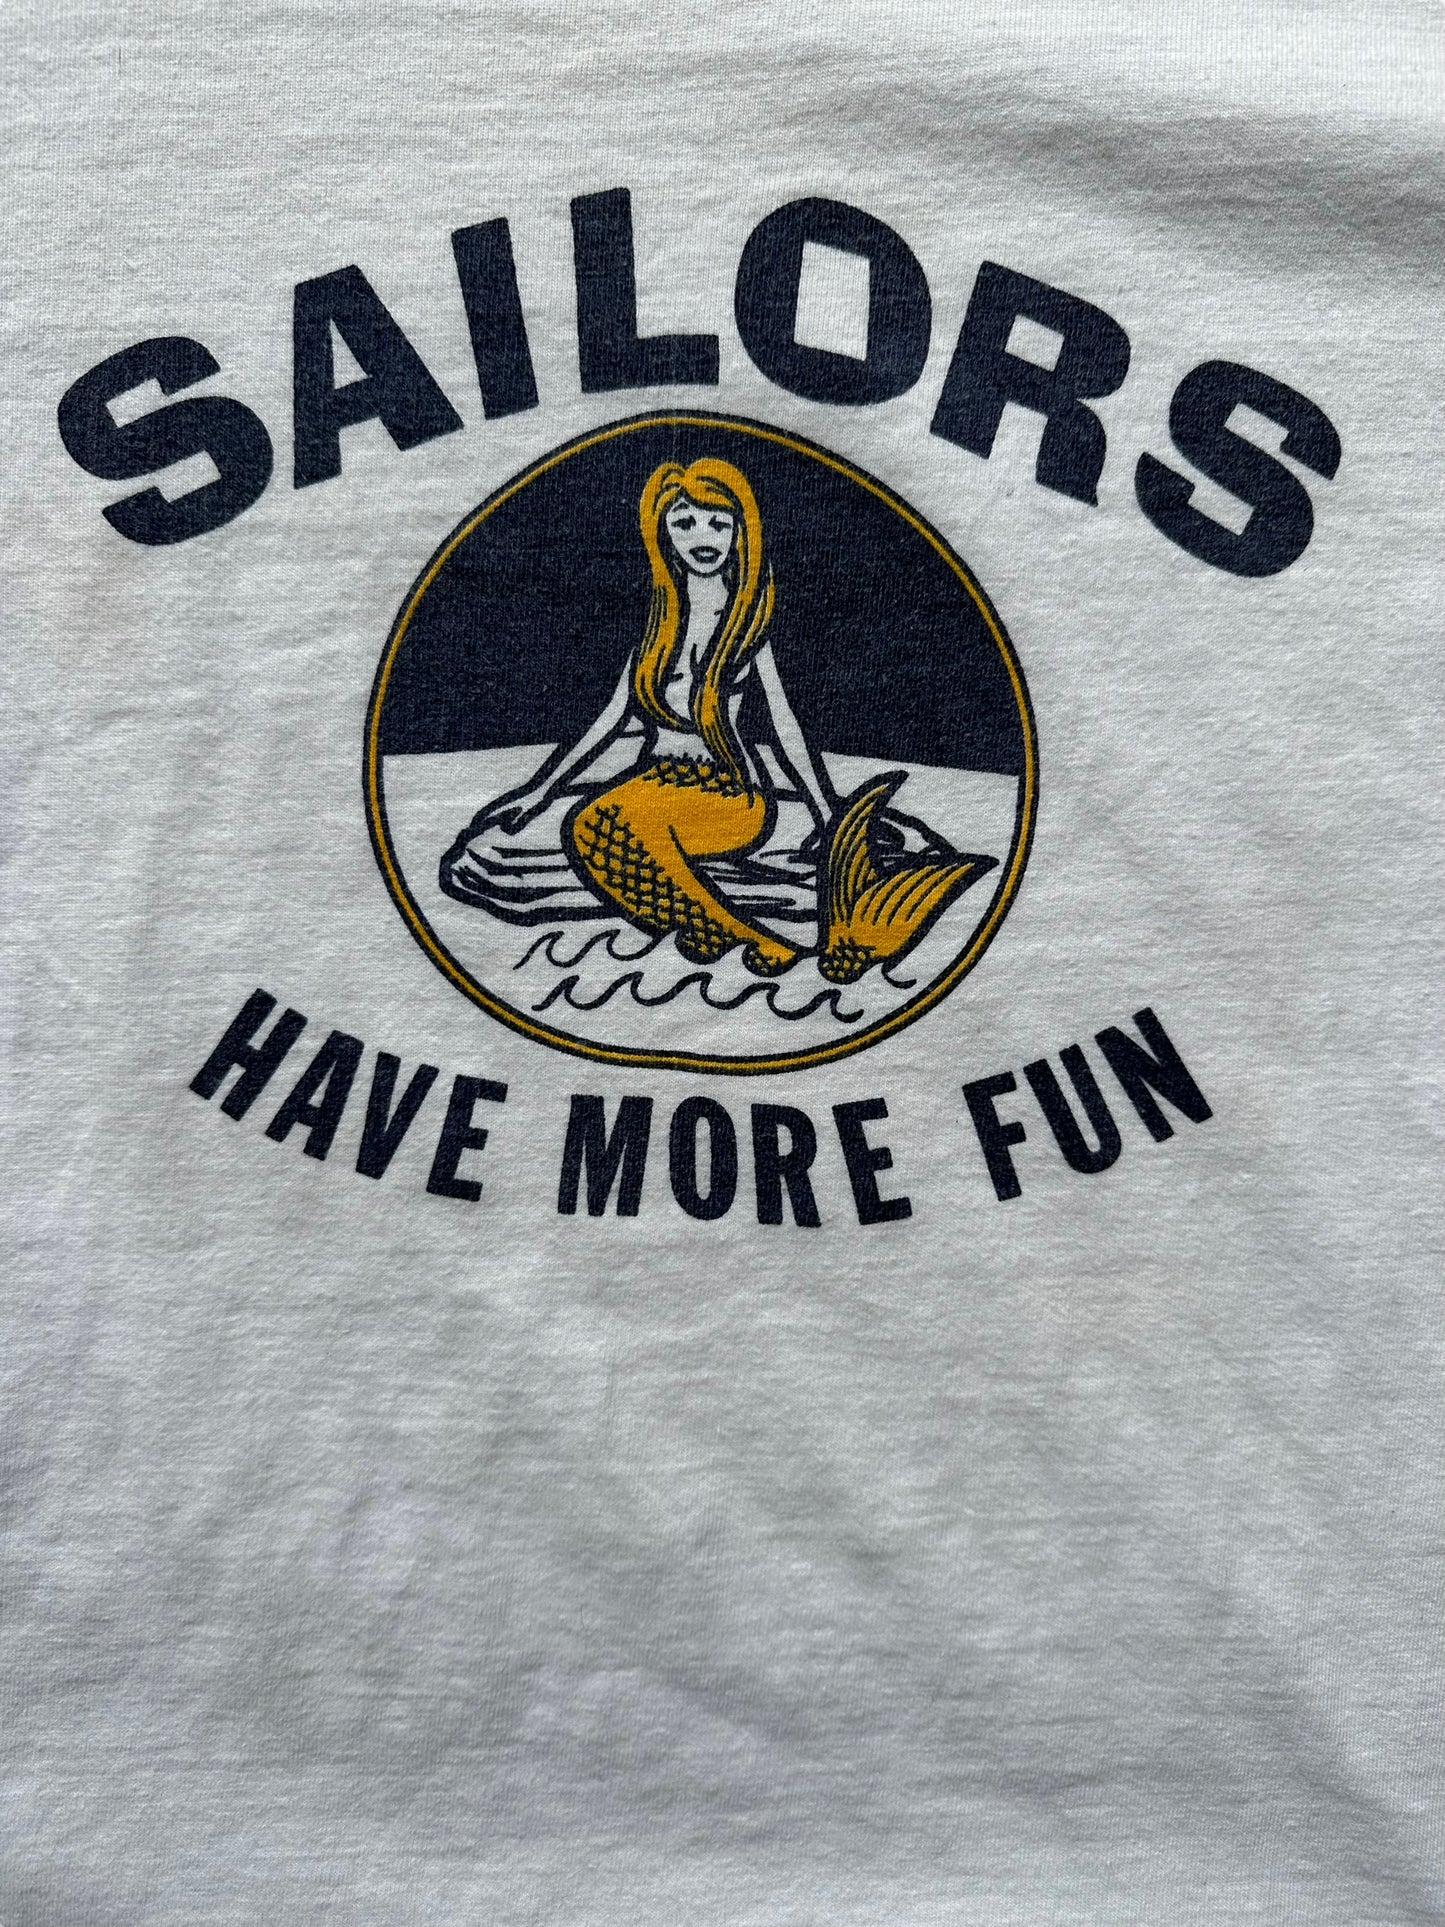 Front Detail Close Up of Vintage Sailors Have More Fun Ringer Tee SZ M | Vintage T-Shirts Seattle | Barn Owl Vintage Tees Seattle